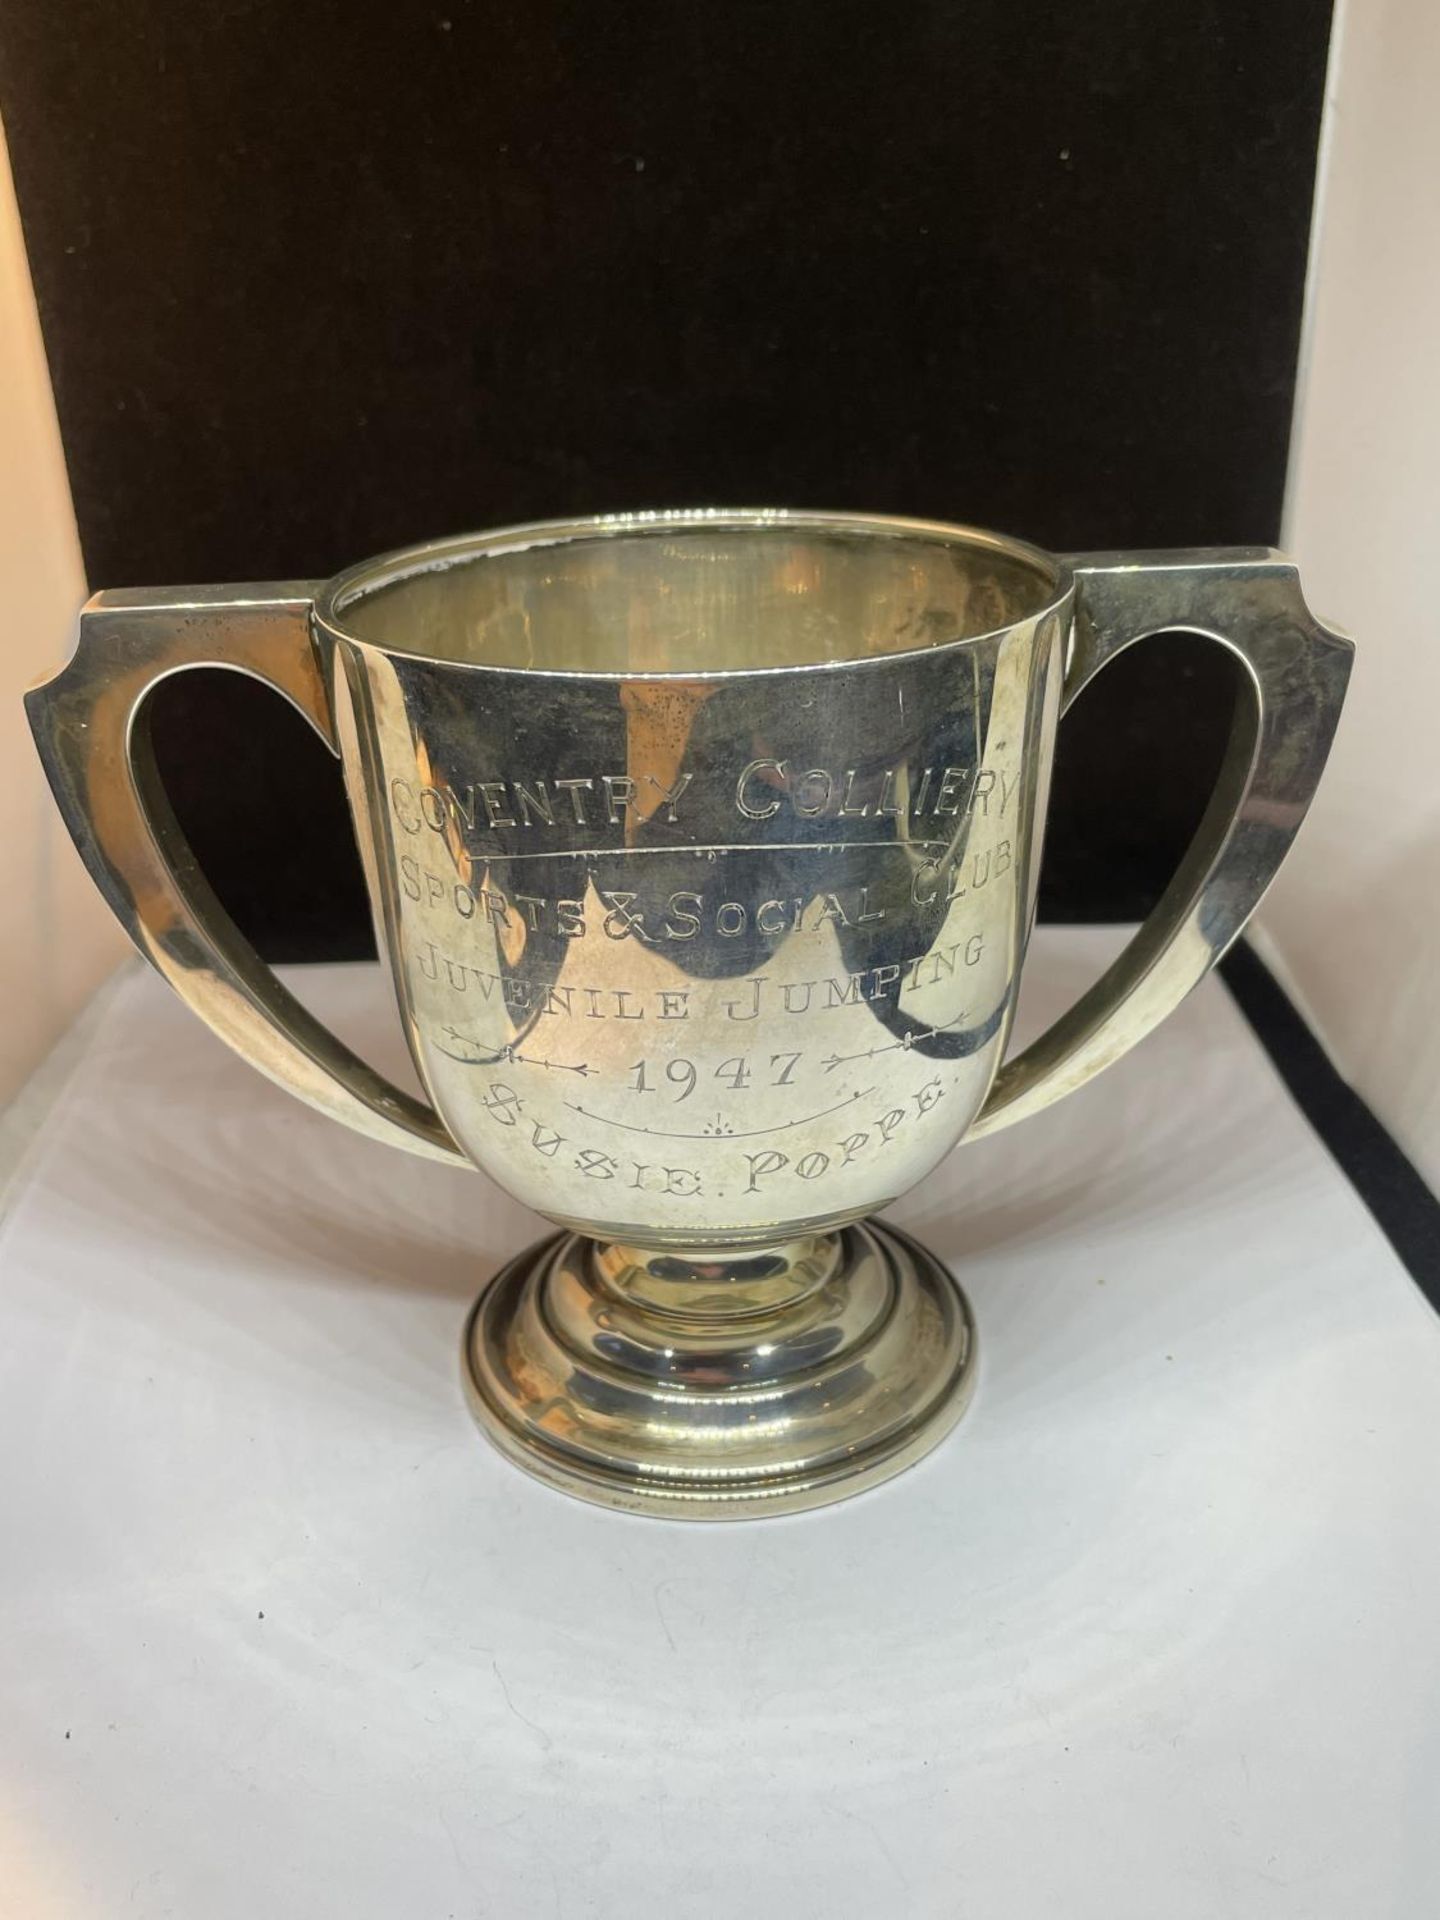 A HALLMARKED BIRMINGHAM SILVER TWIN HANDLED TROPHY FROM COVENTRY COLLEGE 1947 FOR JUVENILE JUMPING